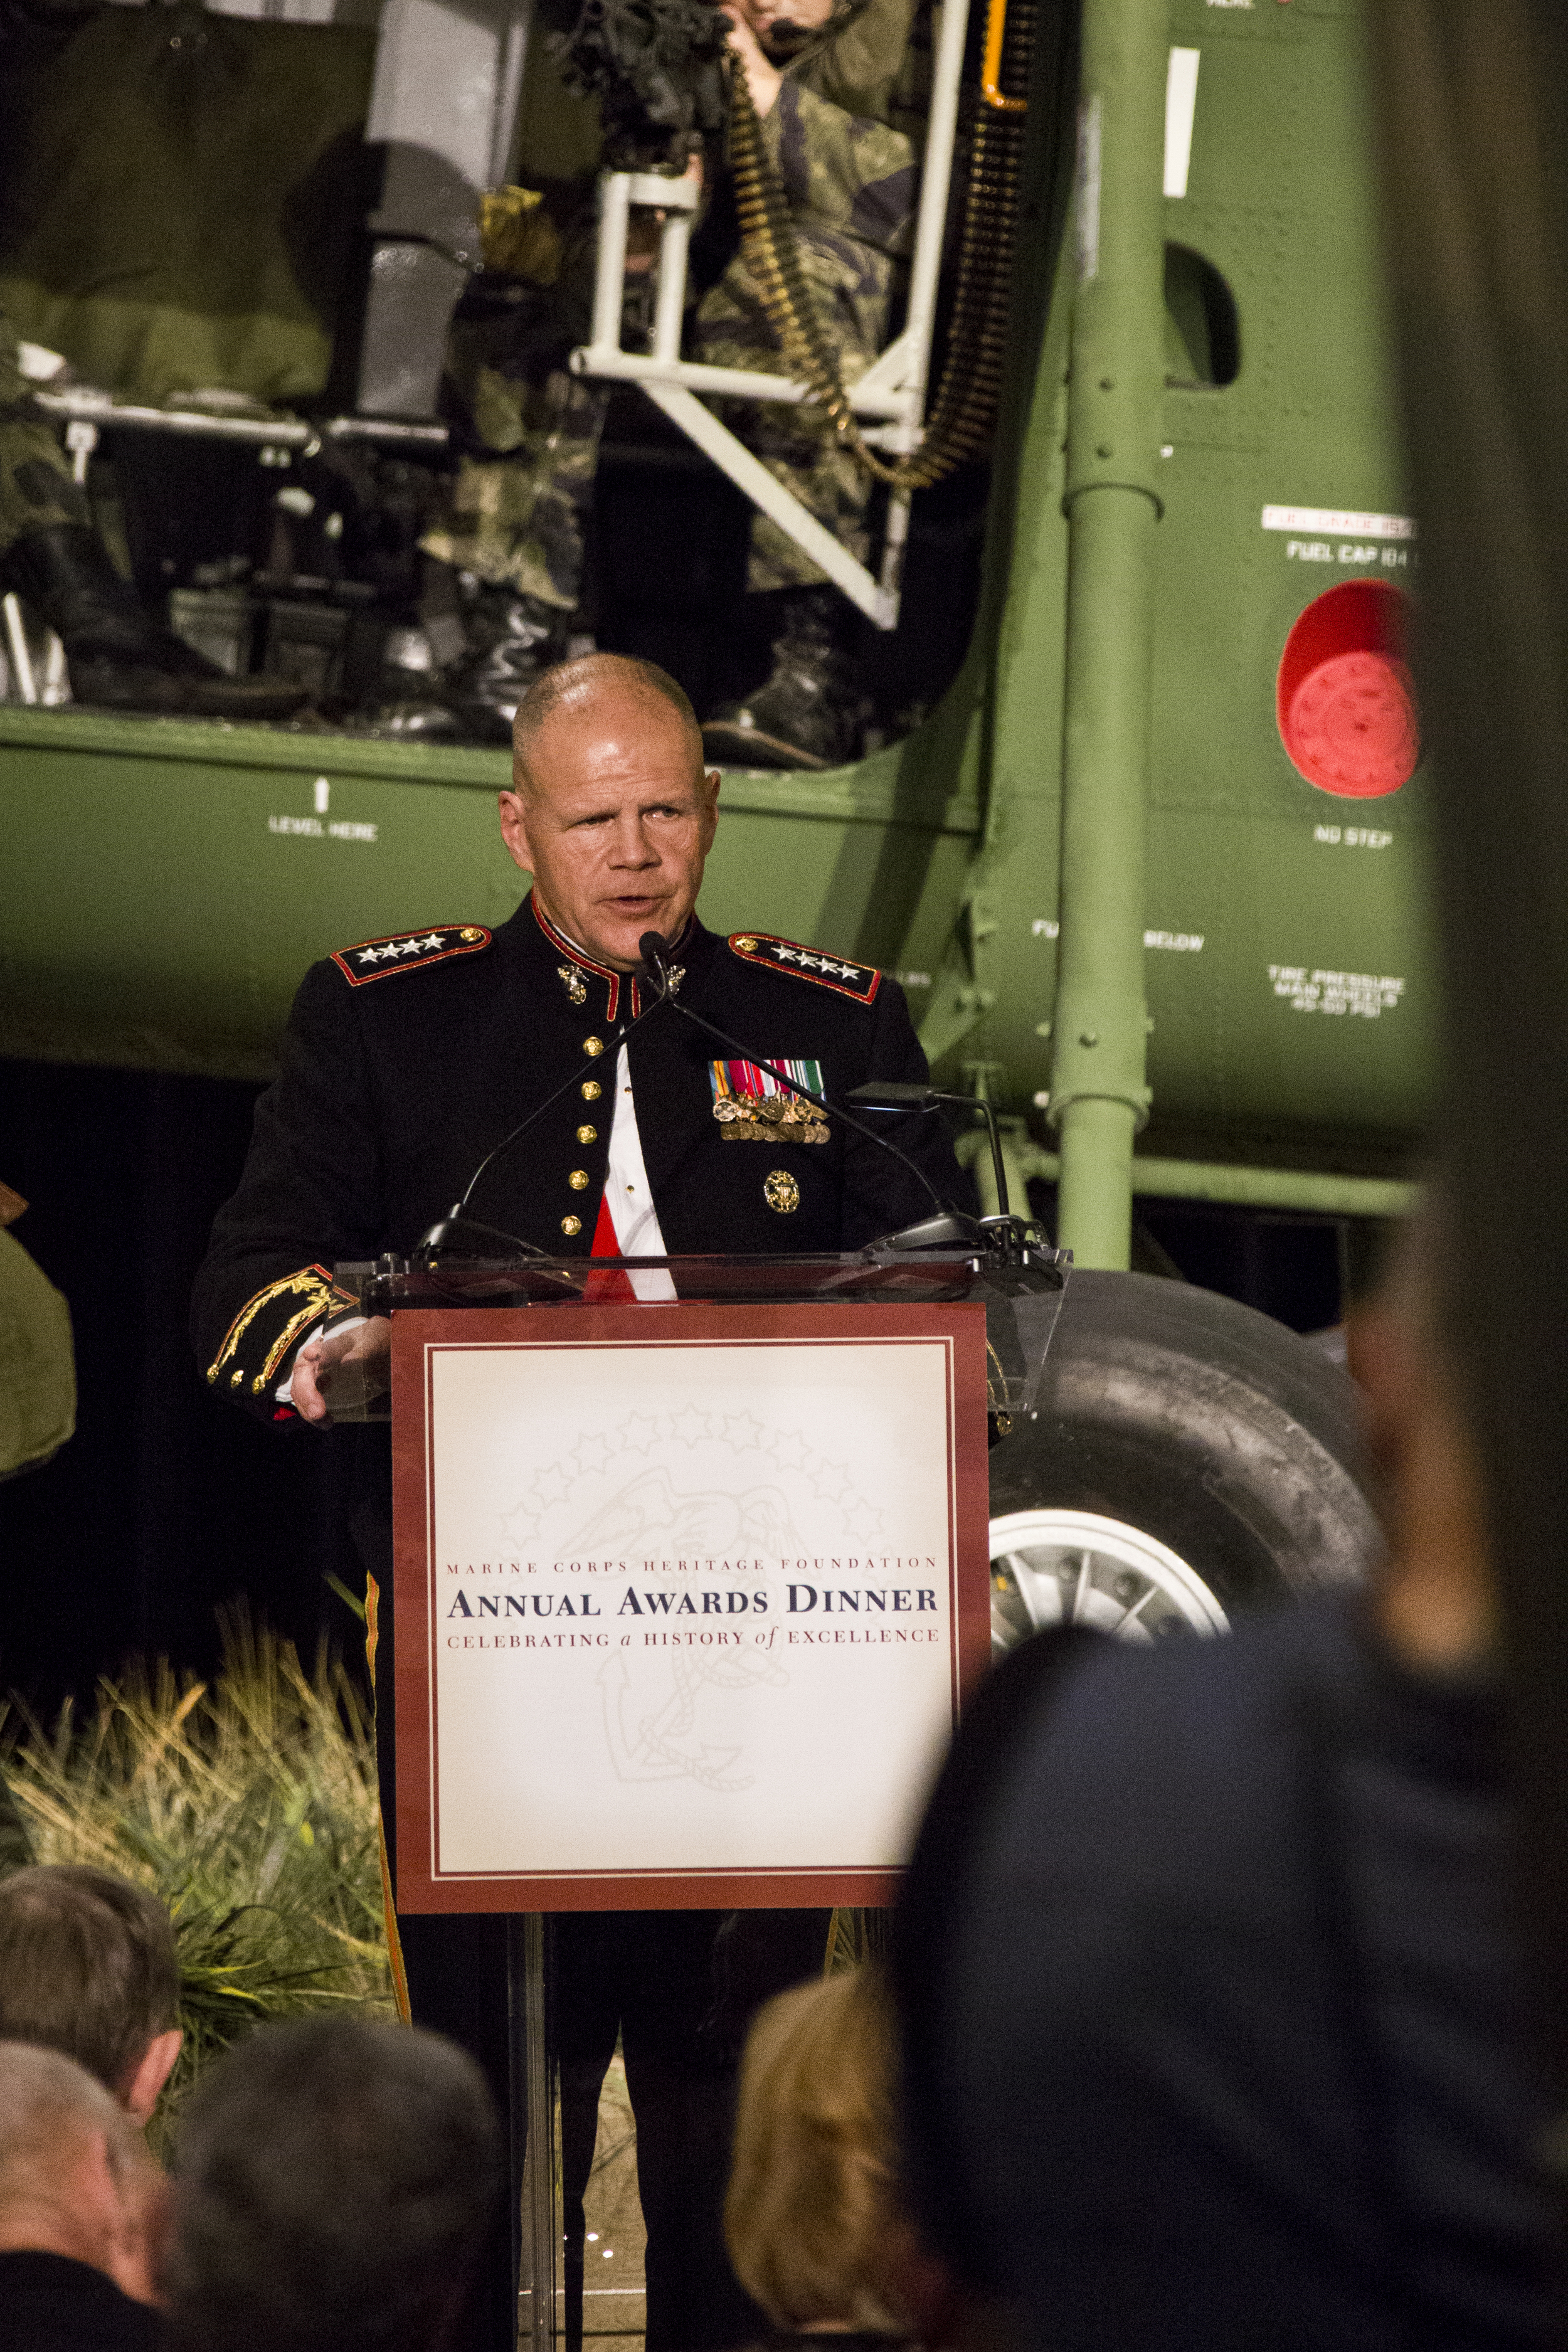  General Robert Neller military guest of honor at the 35th Annual Awards Dinner 